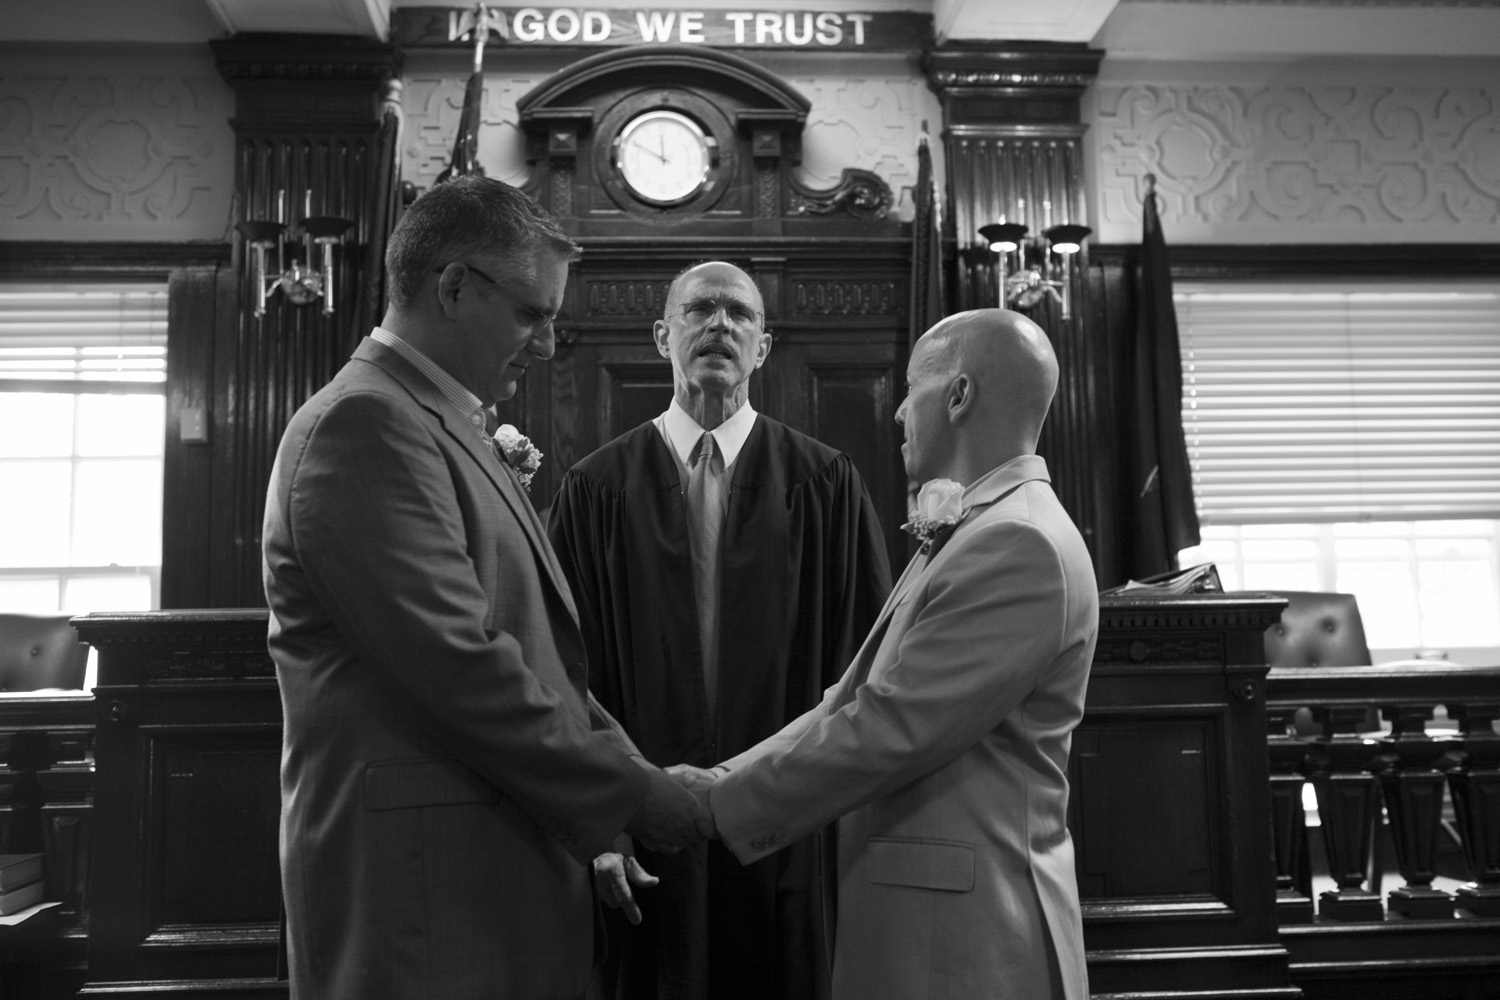 Anthony Lodico (left) and Jack Cuffe of Staten Island, hold hands during their wedding ceremony, by Hon. Thomas P. Aliotta at Borough Hall, Staten Island New York on Sunday, July 24, 2011.